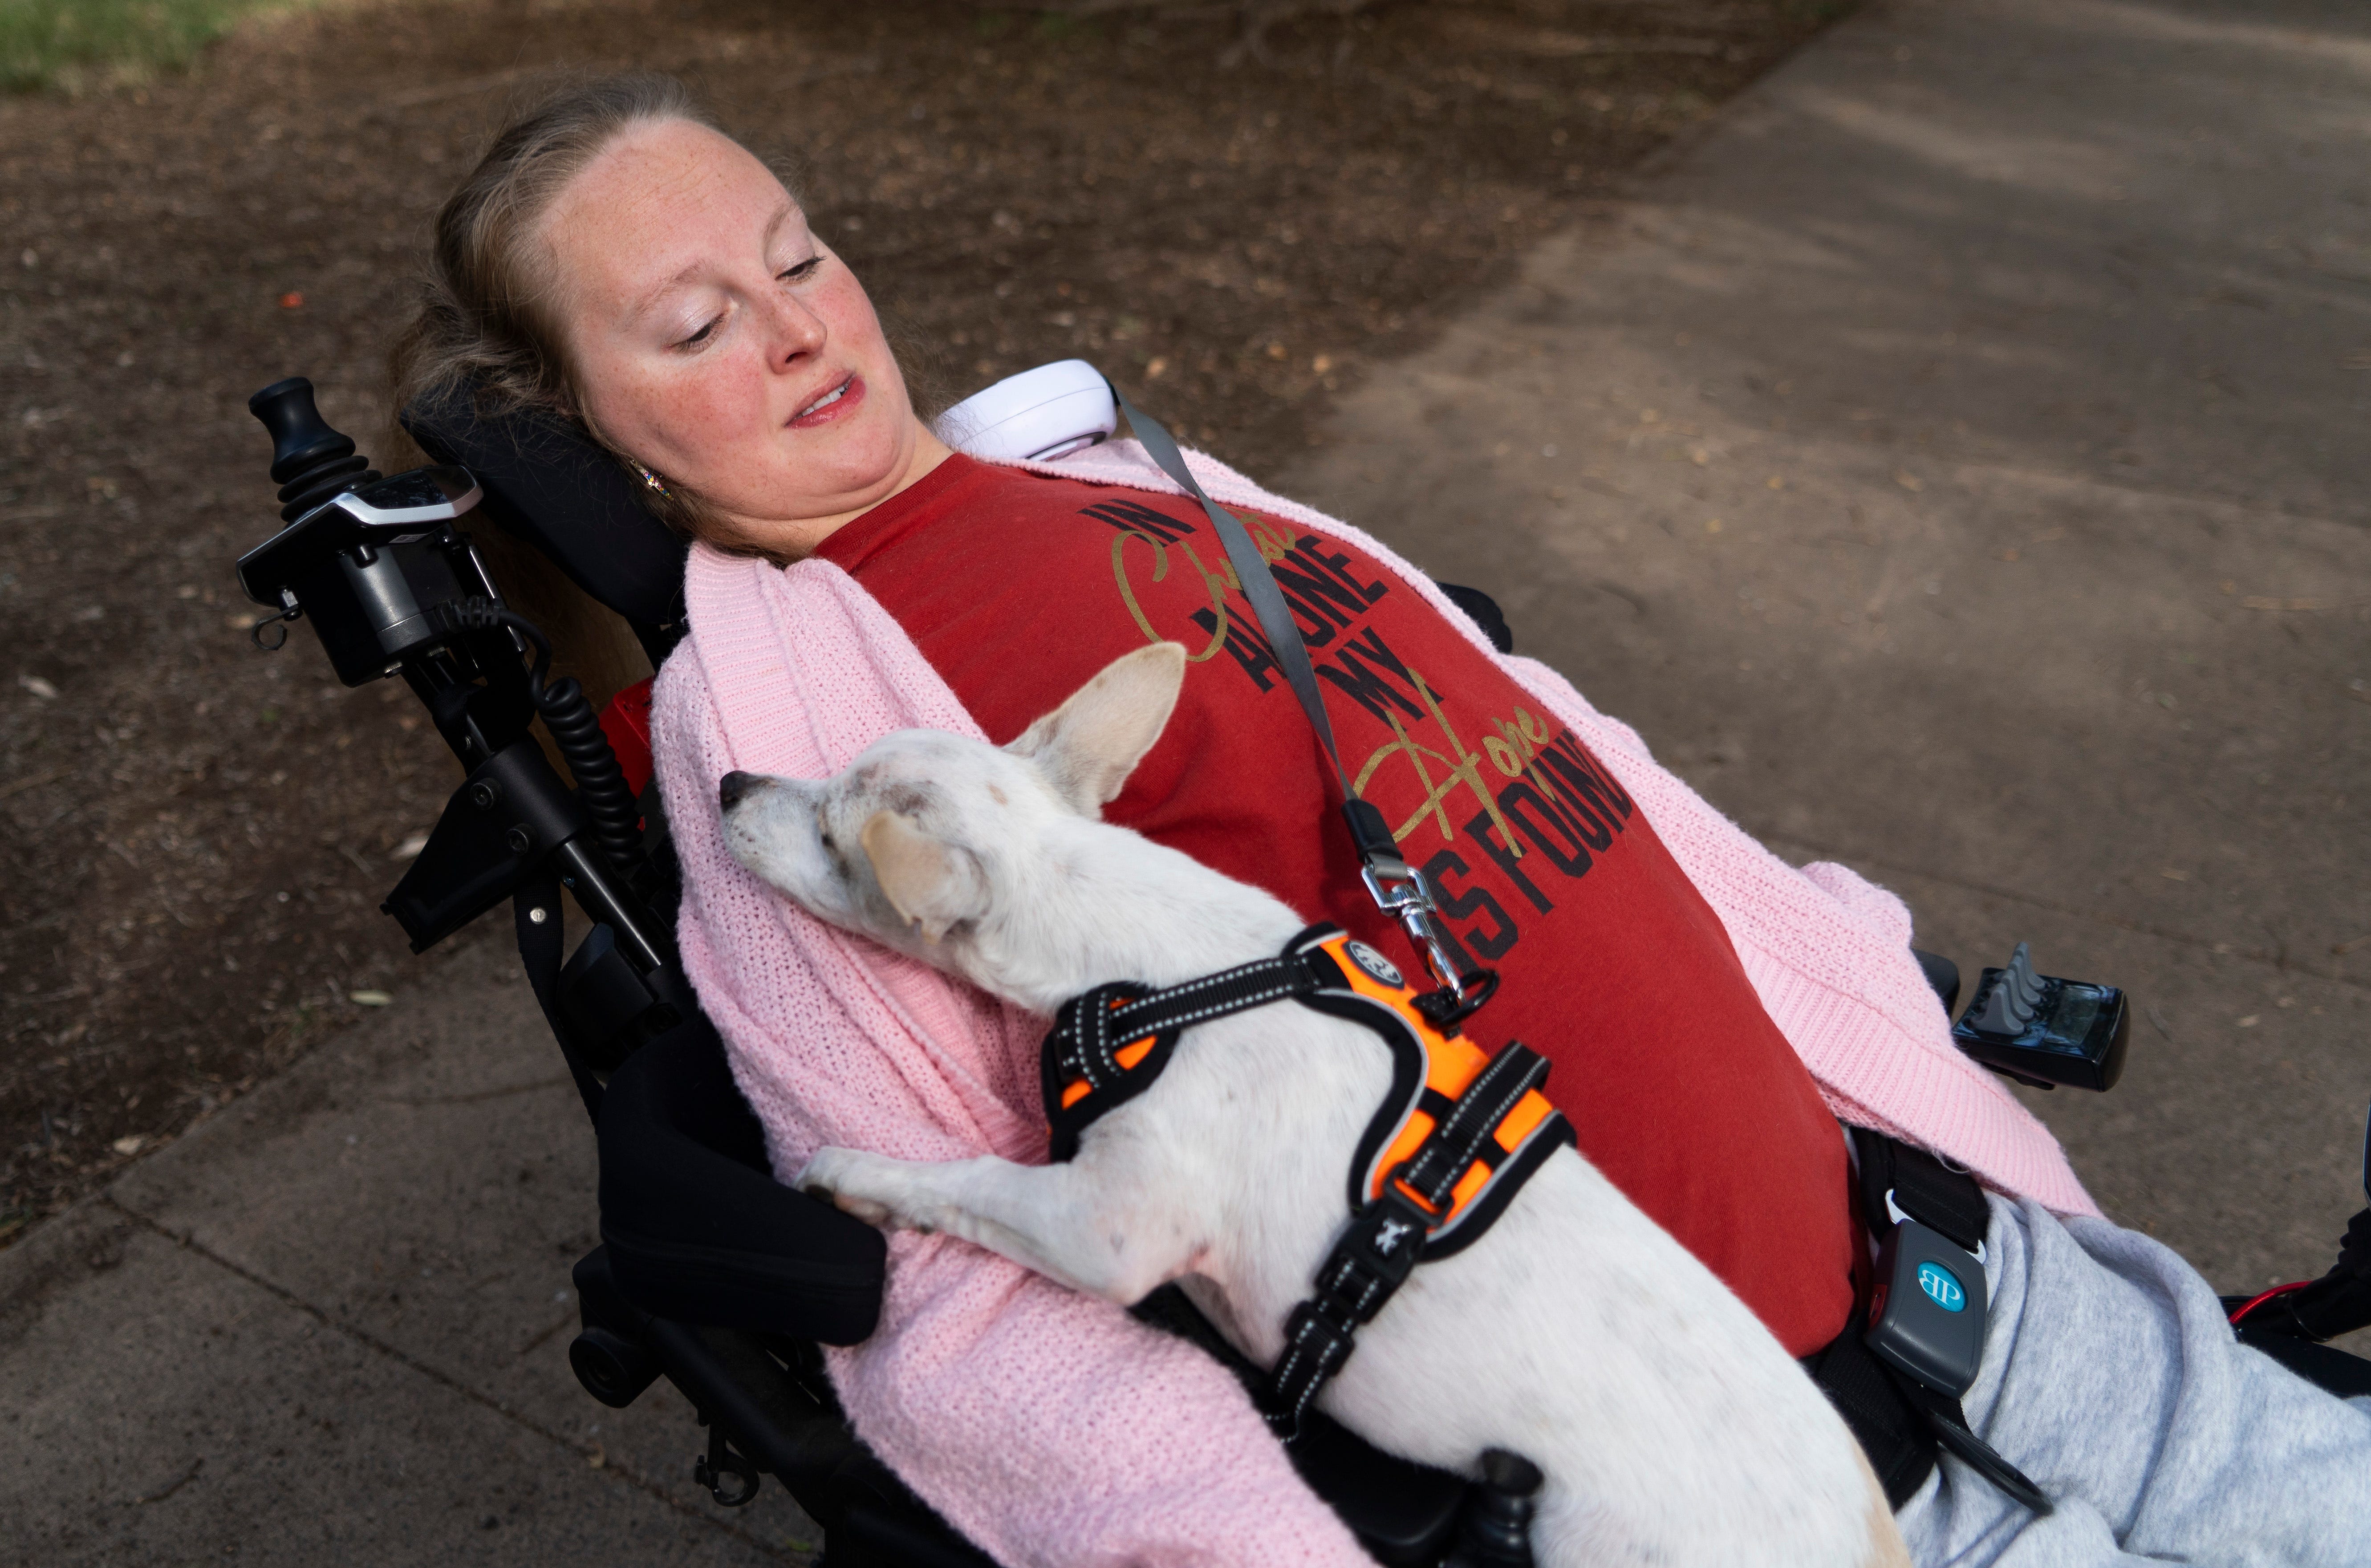 Laura Keenan with her companion dog Beanie Baby at Oak Grove Park in San Diego, Calif. On Nov. 18, 2021. Keenan, 27, has a genetic mutation that was officially identified by the NIH this year.